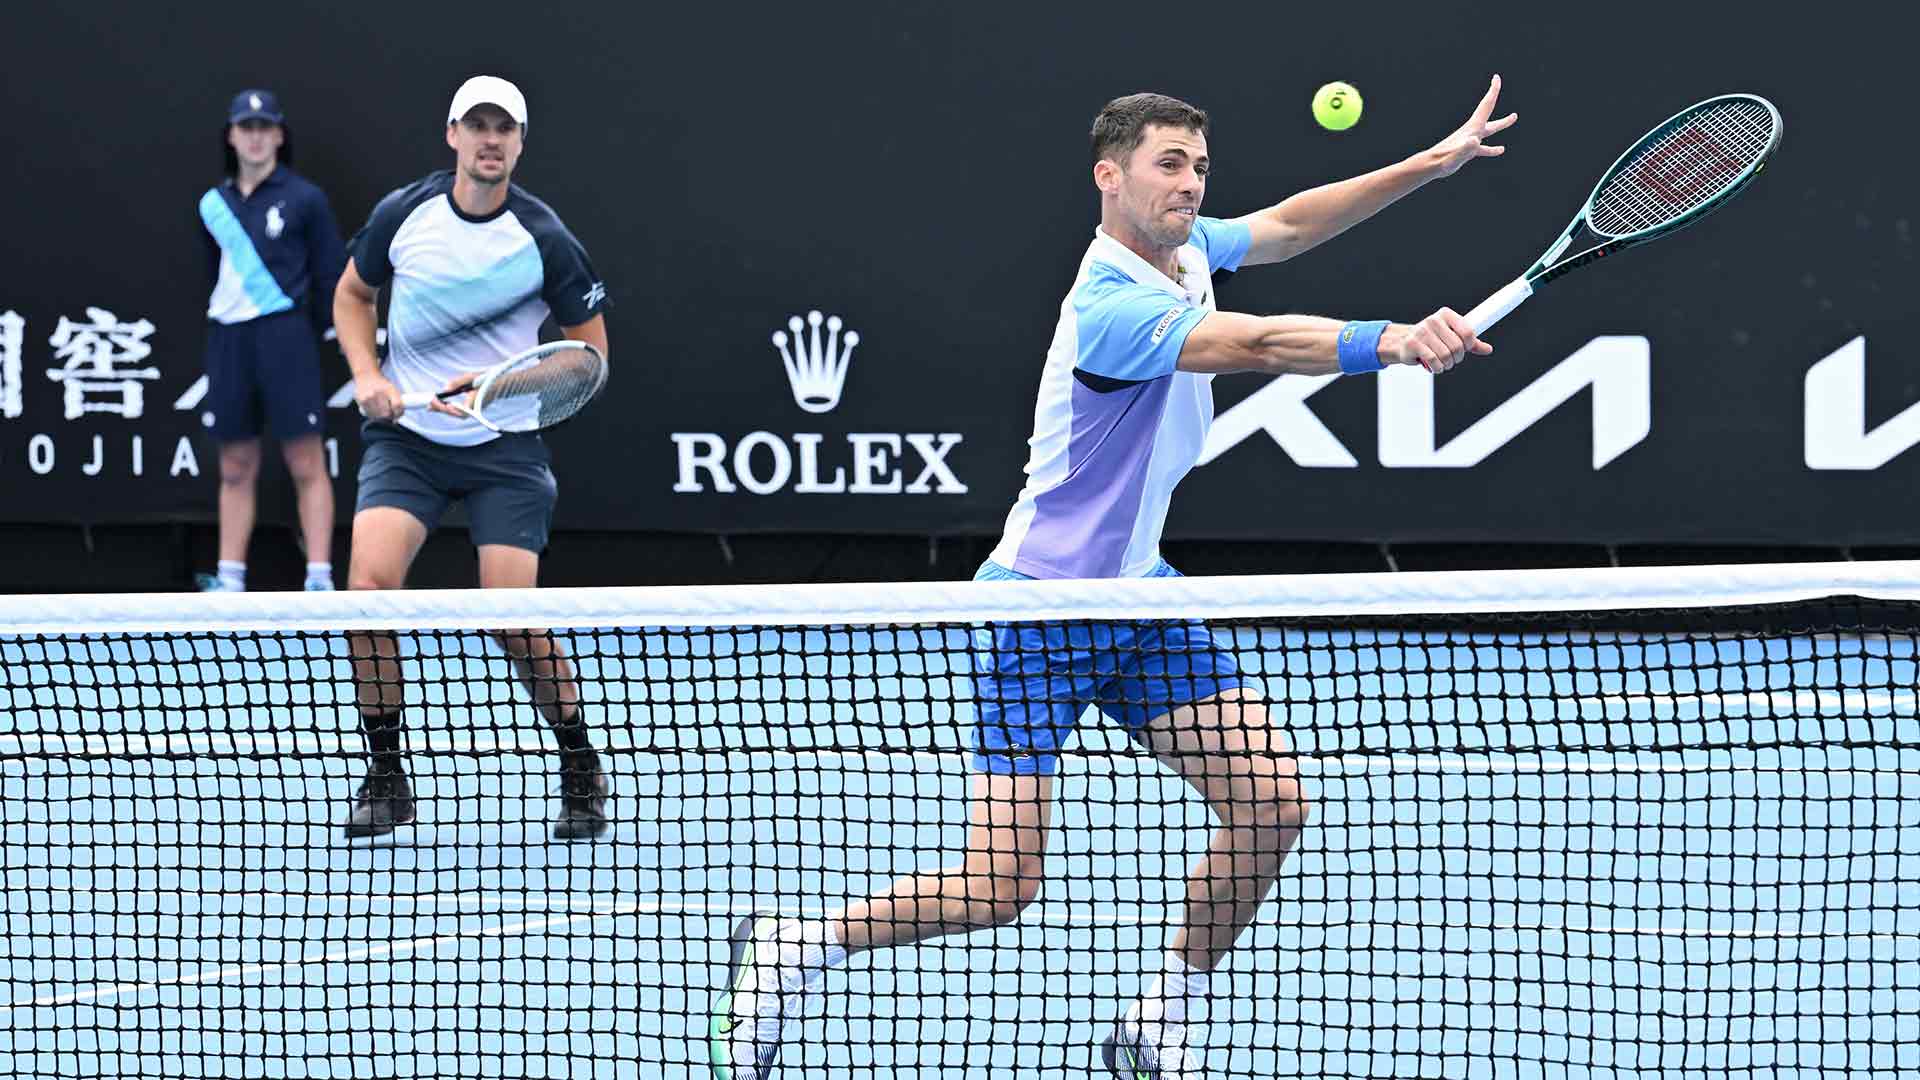 Denys Molchanov and Nikola Cacic in action on Friday in Melbourne.